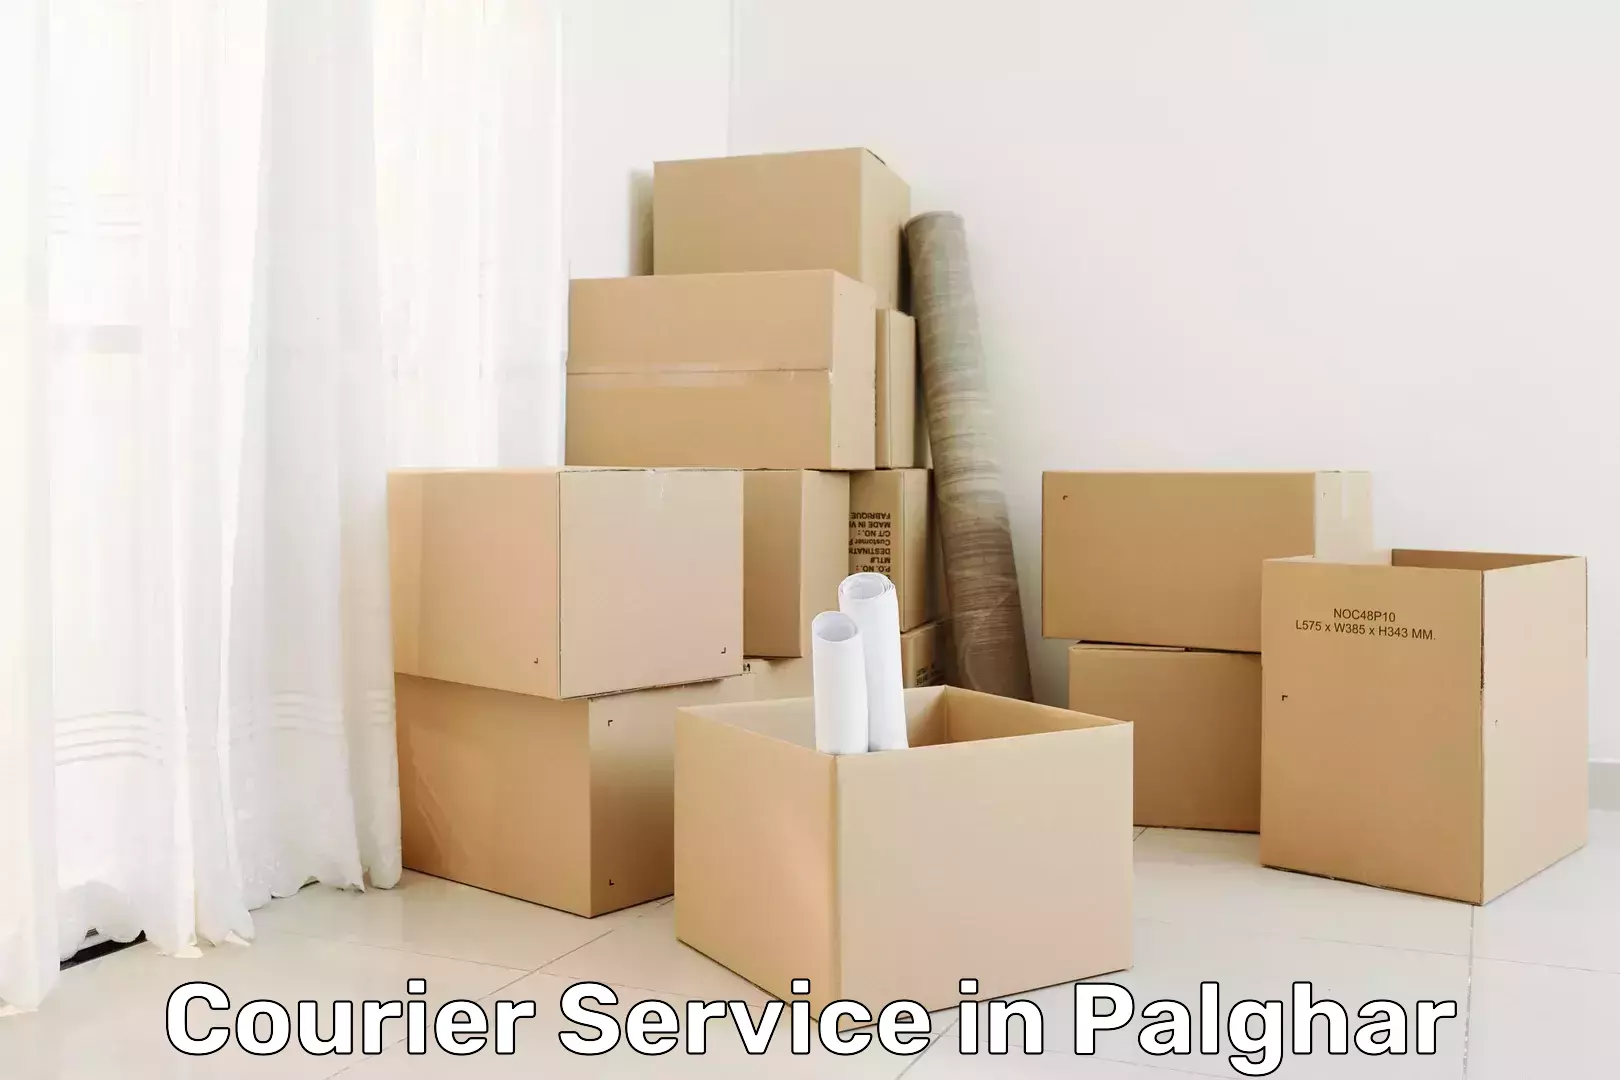 Professional parcel services in Palghar